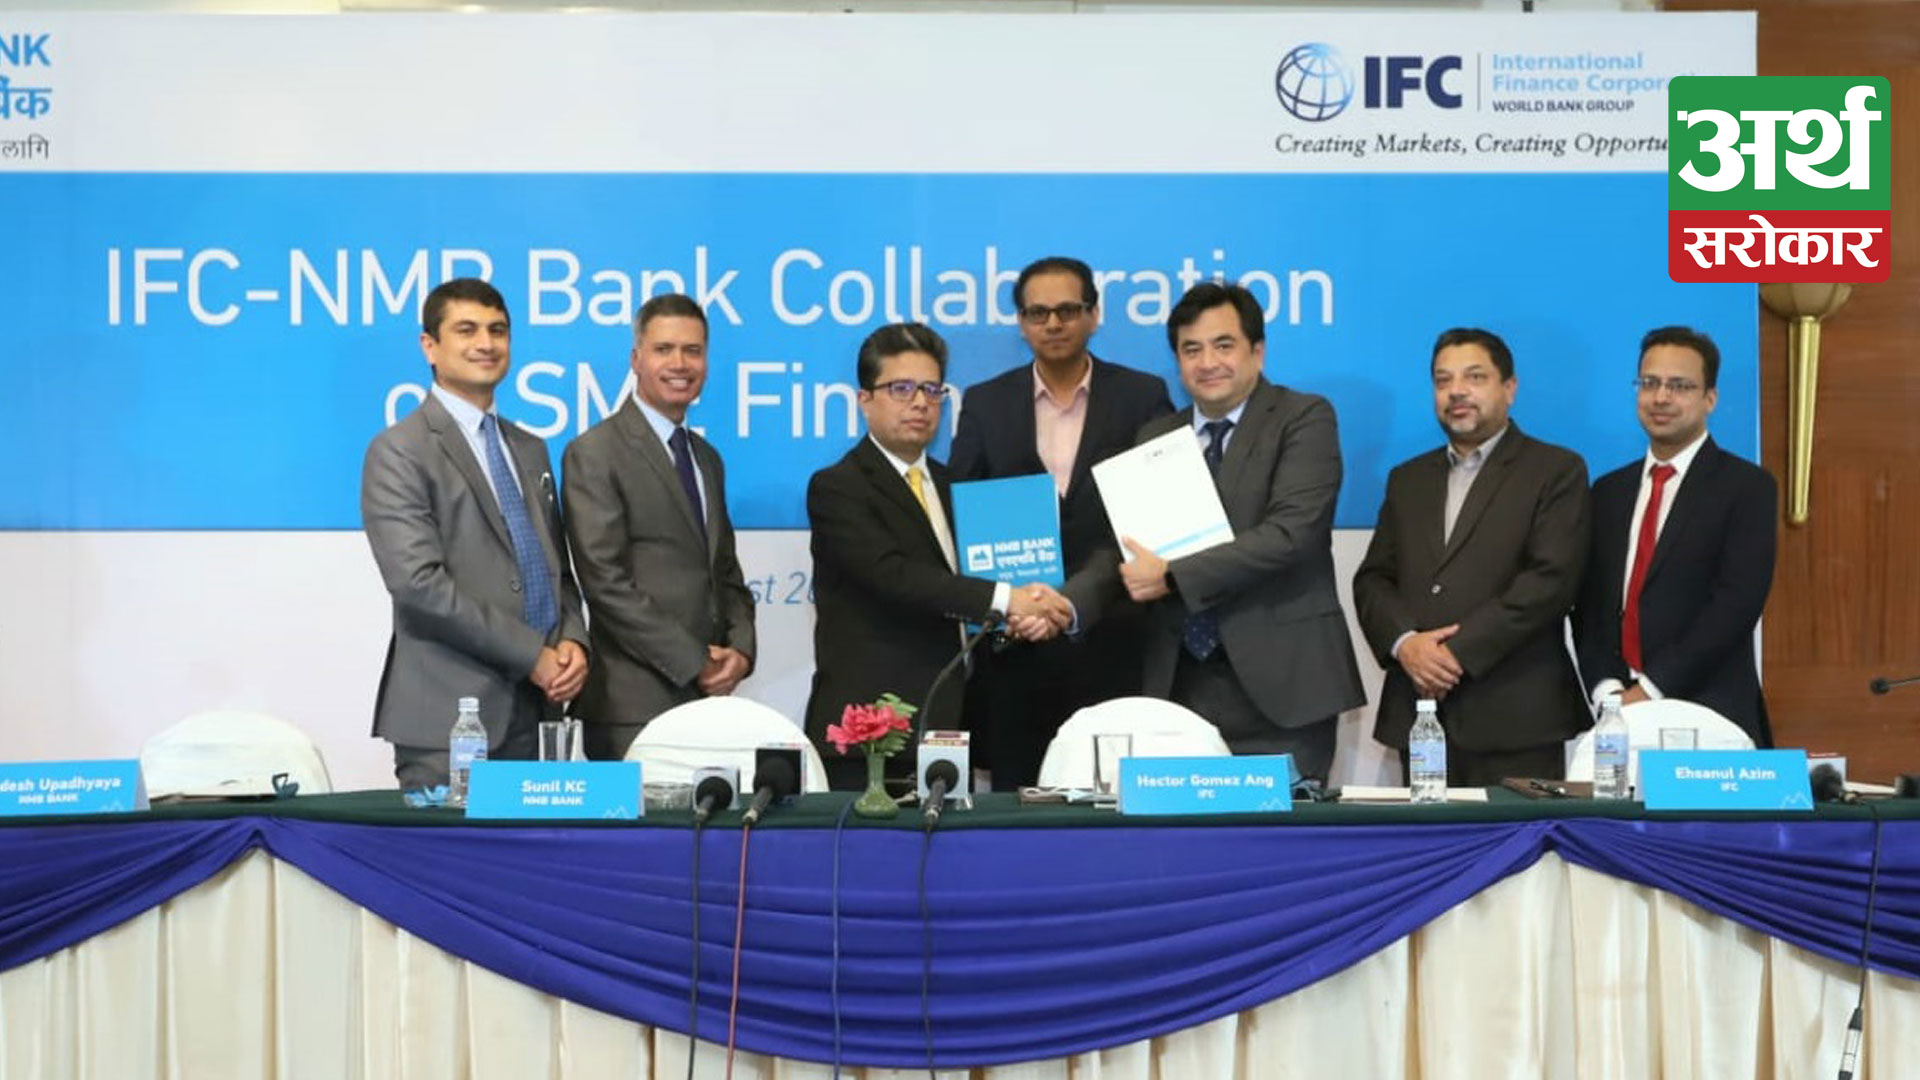 NMB Bank collaborates with IFC to promote SME financing in Nepal